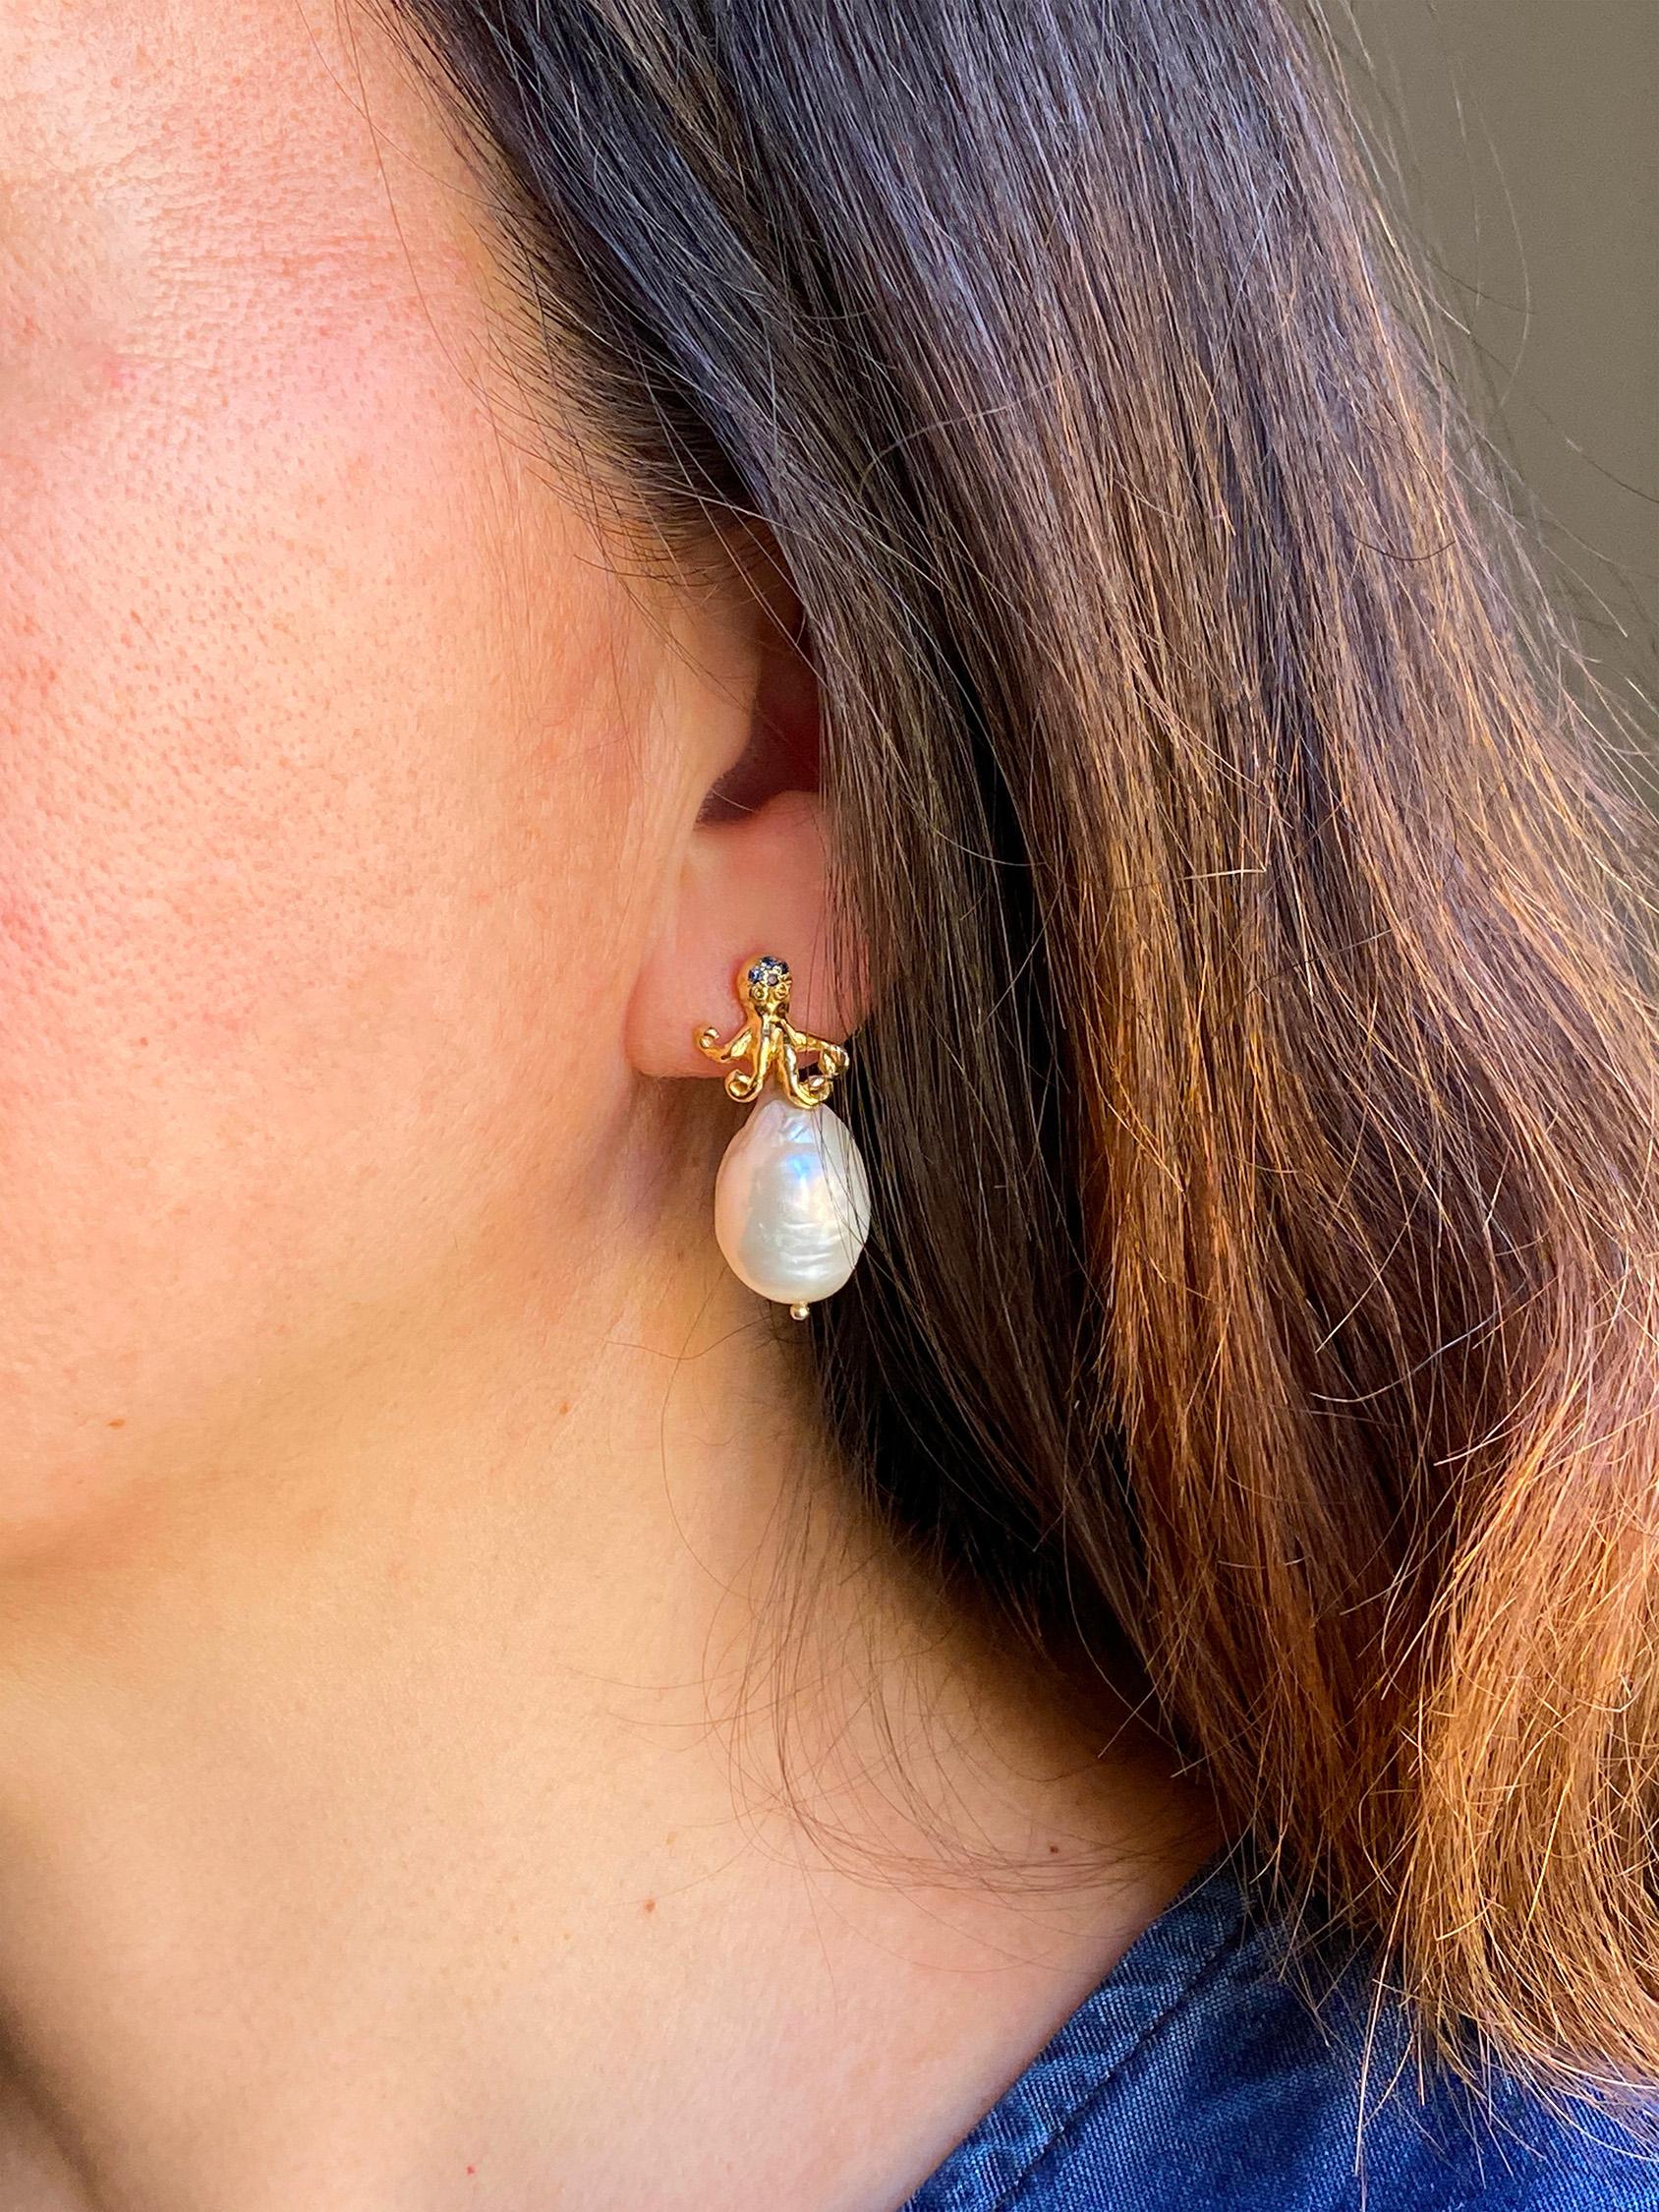 Brilliant Cut Octopus Earrings Handmade Yellow Gold Blue Sapphire Ocean-inspired Baroque  For Sale